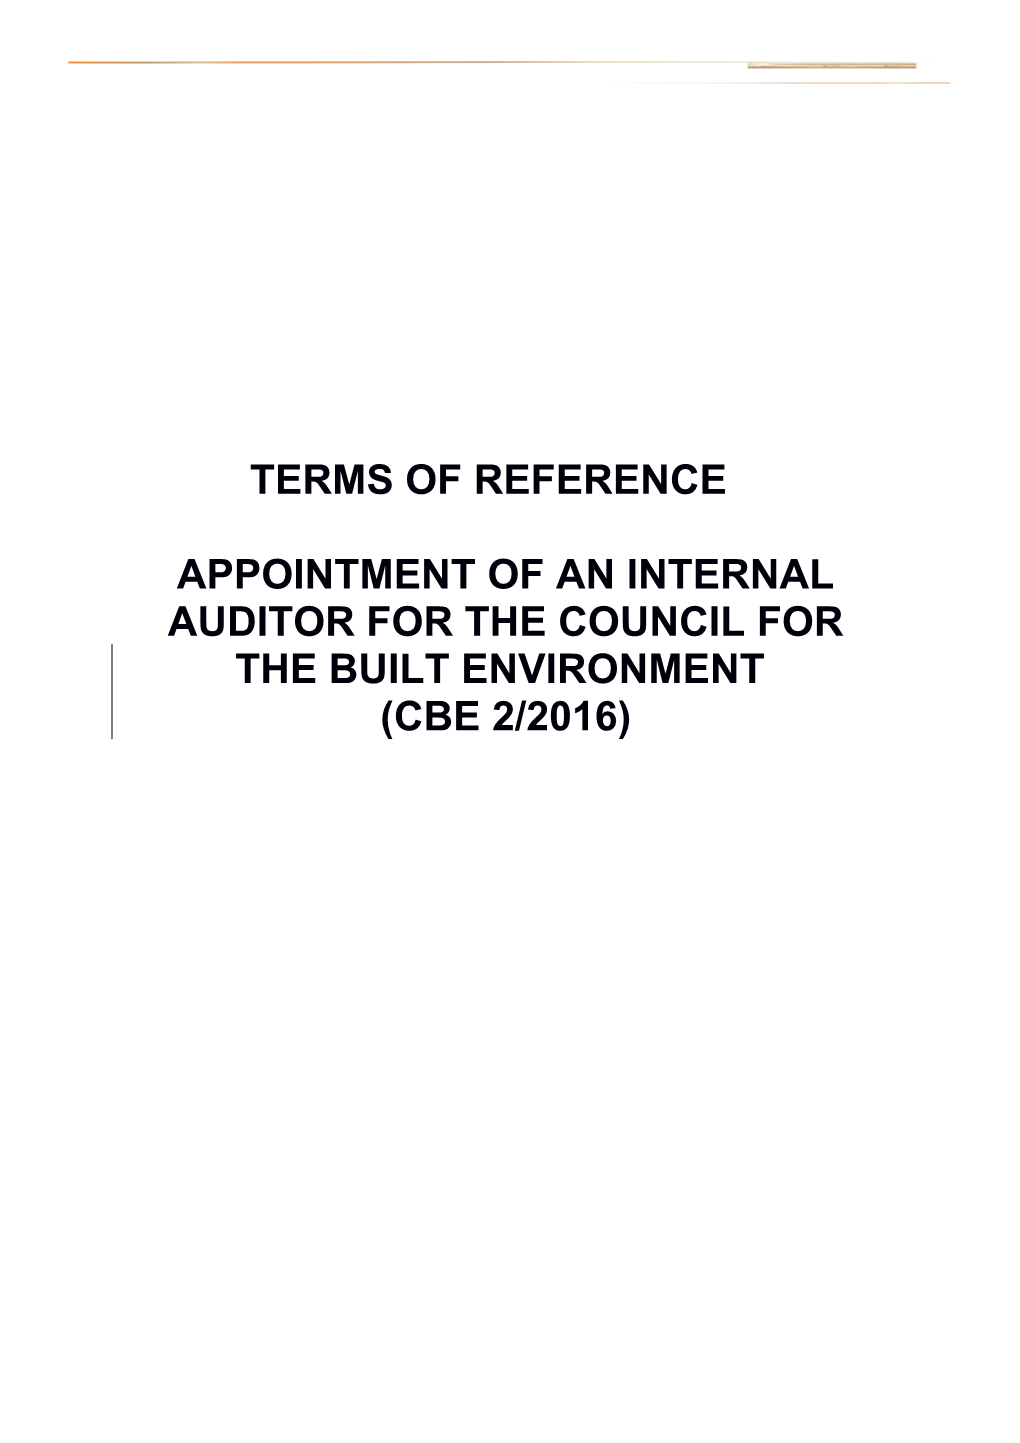 Appointment of an Internal Auditor for the Council for the Built Environment